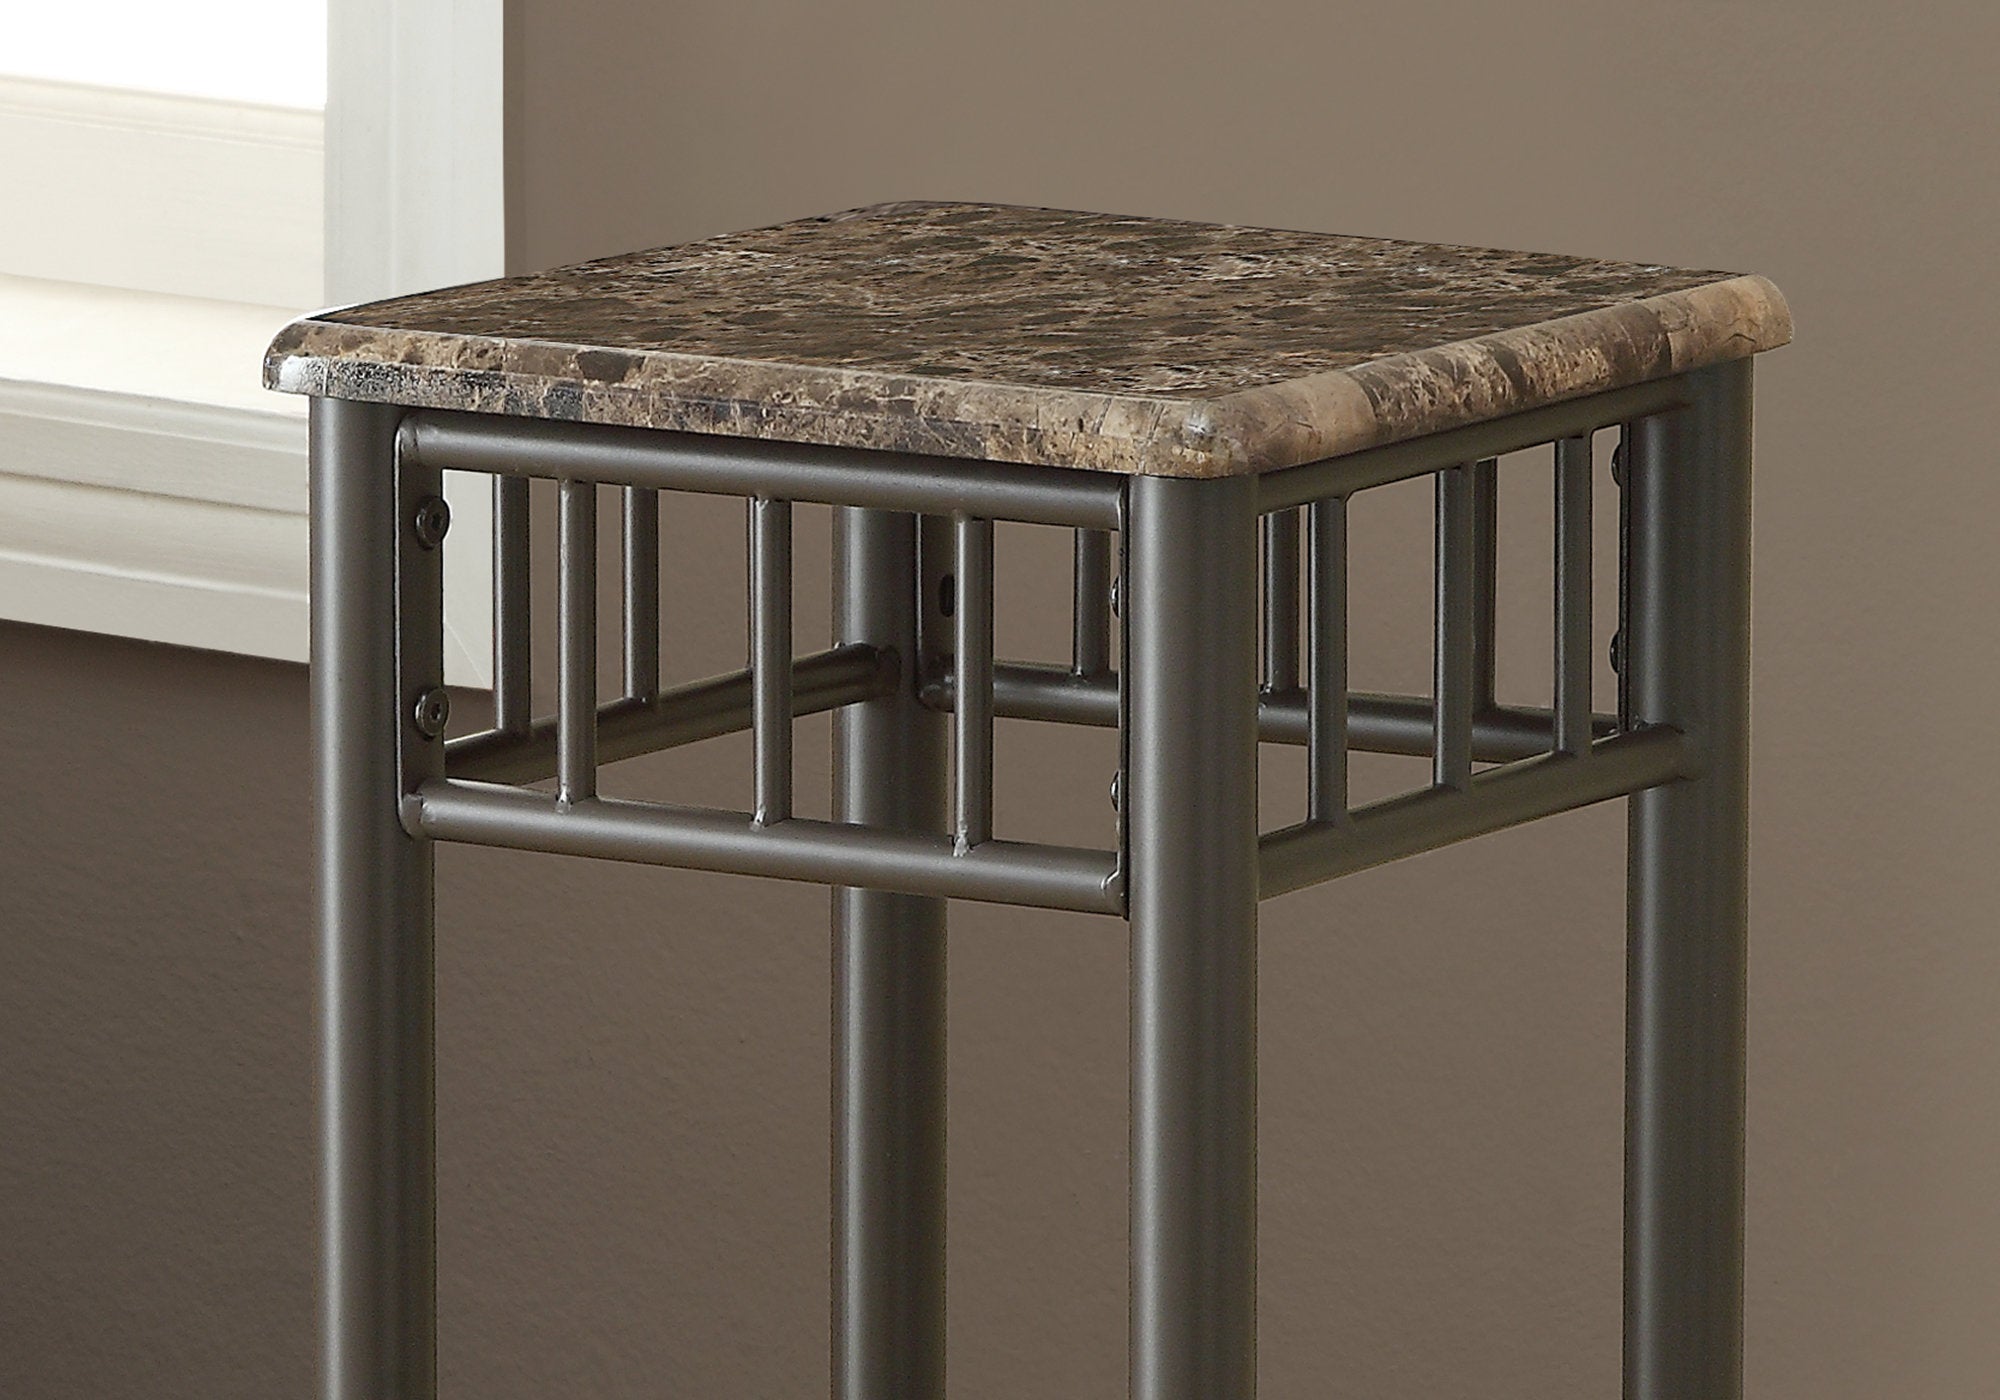 12" x 12" x 28" Cappuccino Mdf Metal Accent Table